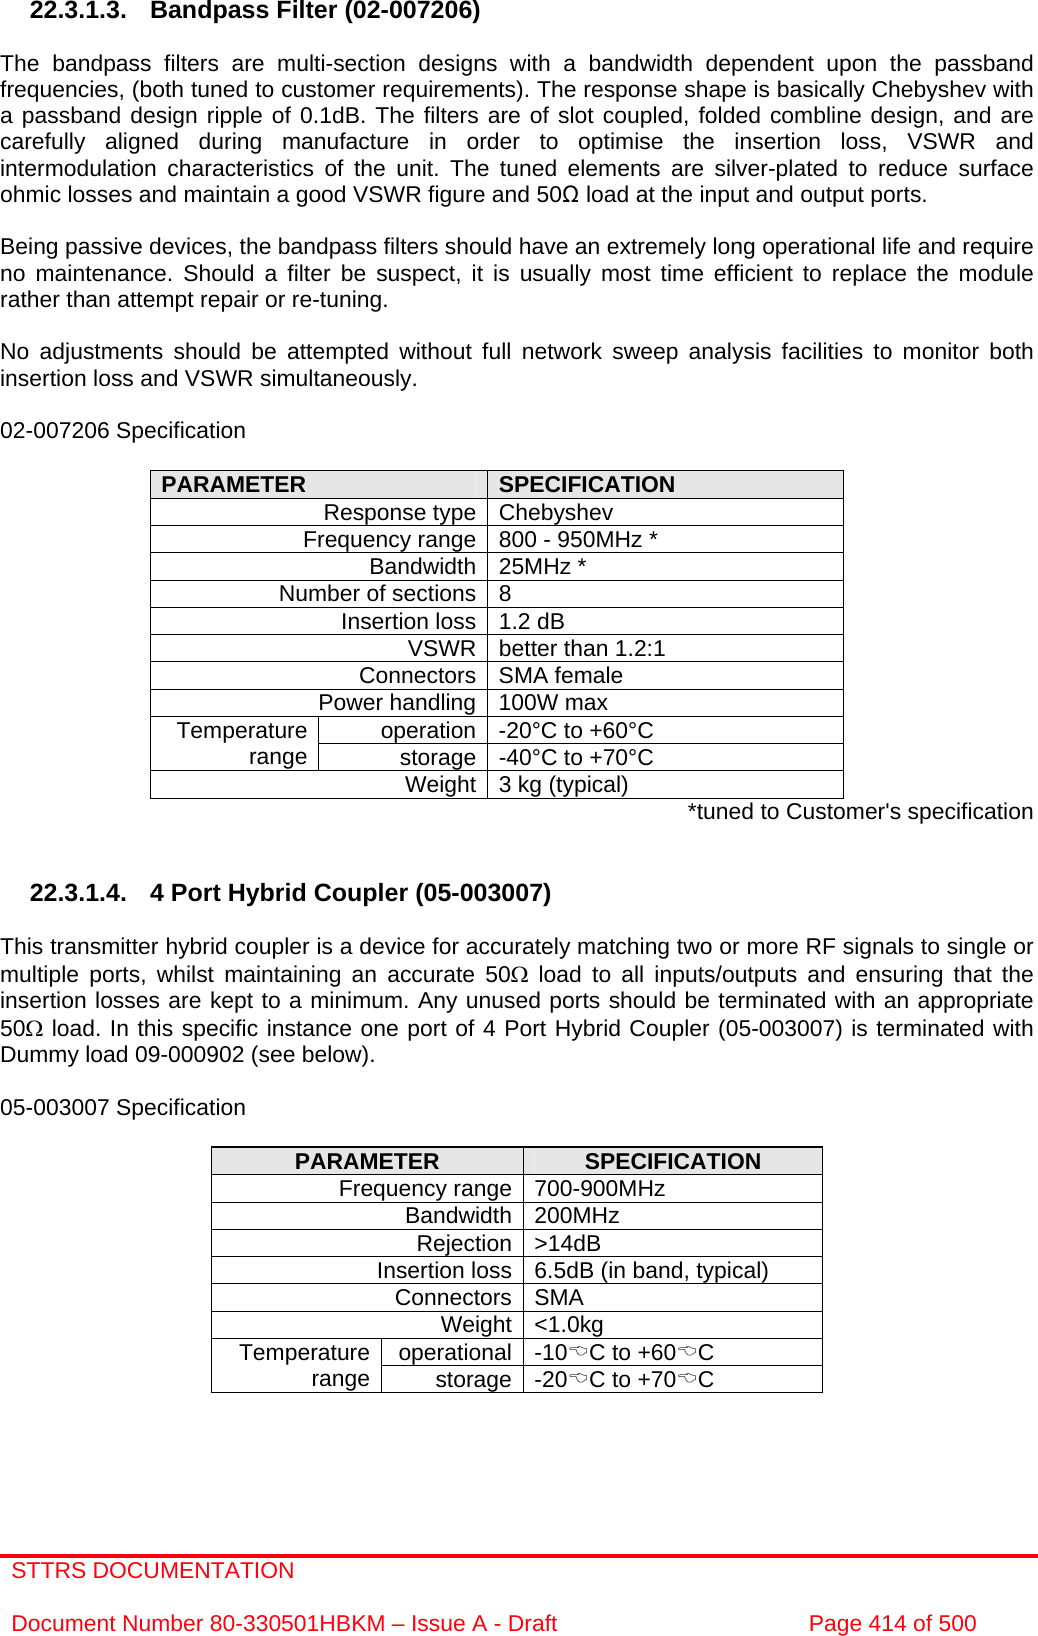 STTRS DOCUMENTATION  Document Number 80-330501HBKM – Issue A - Draft  Page 414 of 500   22.3.1.3.  Bandpass Filter (02-007206)  The bandpass filters are multi-section designs with a bandwidth dependent upon the passband frequencies, (both tuned to customer requirements). The response shape is basically Chebyshev with a passband design ripple of 0.1dB. The filters are of slot coupled, folded combline design, and are carefully aligned during manufacture in order to optimise the insertion loss, VSWR and intermodulation characteristics of the unit. The tuned elements are silver-plated to reduce surface ohmic losses and maintain a good VSWR figure and 50Ω load at the input and output ports.  Being passive devices, the bandpass filters should have an extremely long operational life and require no maintenance. Should a filter be suspect, it is usually most time efficient to replace the module rather than attempt repair or re-tuning.  No adjustments should be attempted without full network sweep analysis facilities to monitor both insertion loss and VSWR simultaneously.  02-007206 Specification  PARAMETER  SPECIFICATION Response type Chebyshev Frequency range 800 - 950MHz * Bandwidth 25MHz * Number of sections 8 Insertion loss 1.2 dB VSWR better than 1.2:1 Connectors SMA female Power handling 100W max operation -20°C to +60°C Temperature range  storage -40°C to +70°C Weight 3 kg (typical)  *tuned to Customer&apos;s specification   22.3.1.4.  4 Port Hybrid Coupler (05-003007)  This transmitter hybrid coupler is a device for accurately matching two or more RF signals to single or multiple ports, whilst maintaining an accurate 50Ω load to all inputs/outputs and ensuring that the insertion losses are kept to a minimum. Any unused ports should be terminated with an appropriate 50Ω load. In this specific instance one port of 4 Port Hybrid Coupler (05-003007) is terminated with Dummy load 09-000902 (see below).  05-003007 Specification  PARAMETER  SPECIFICATION Frequency range 700-900MHz Bandwidth 200MHz Rejection &gt;14dB Insertion loss 6.5dB (in band, typical) Connectors SMA Weight &lt;1.0kg operational -10%C to +60%C Temperature range  storage -20%C to +70%C   